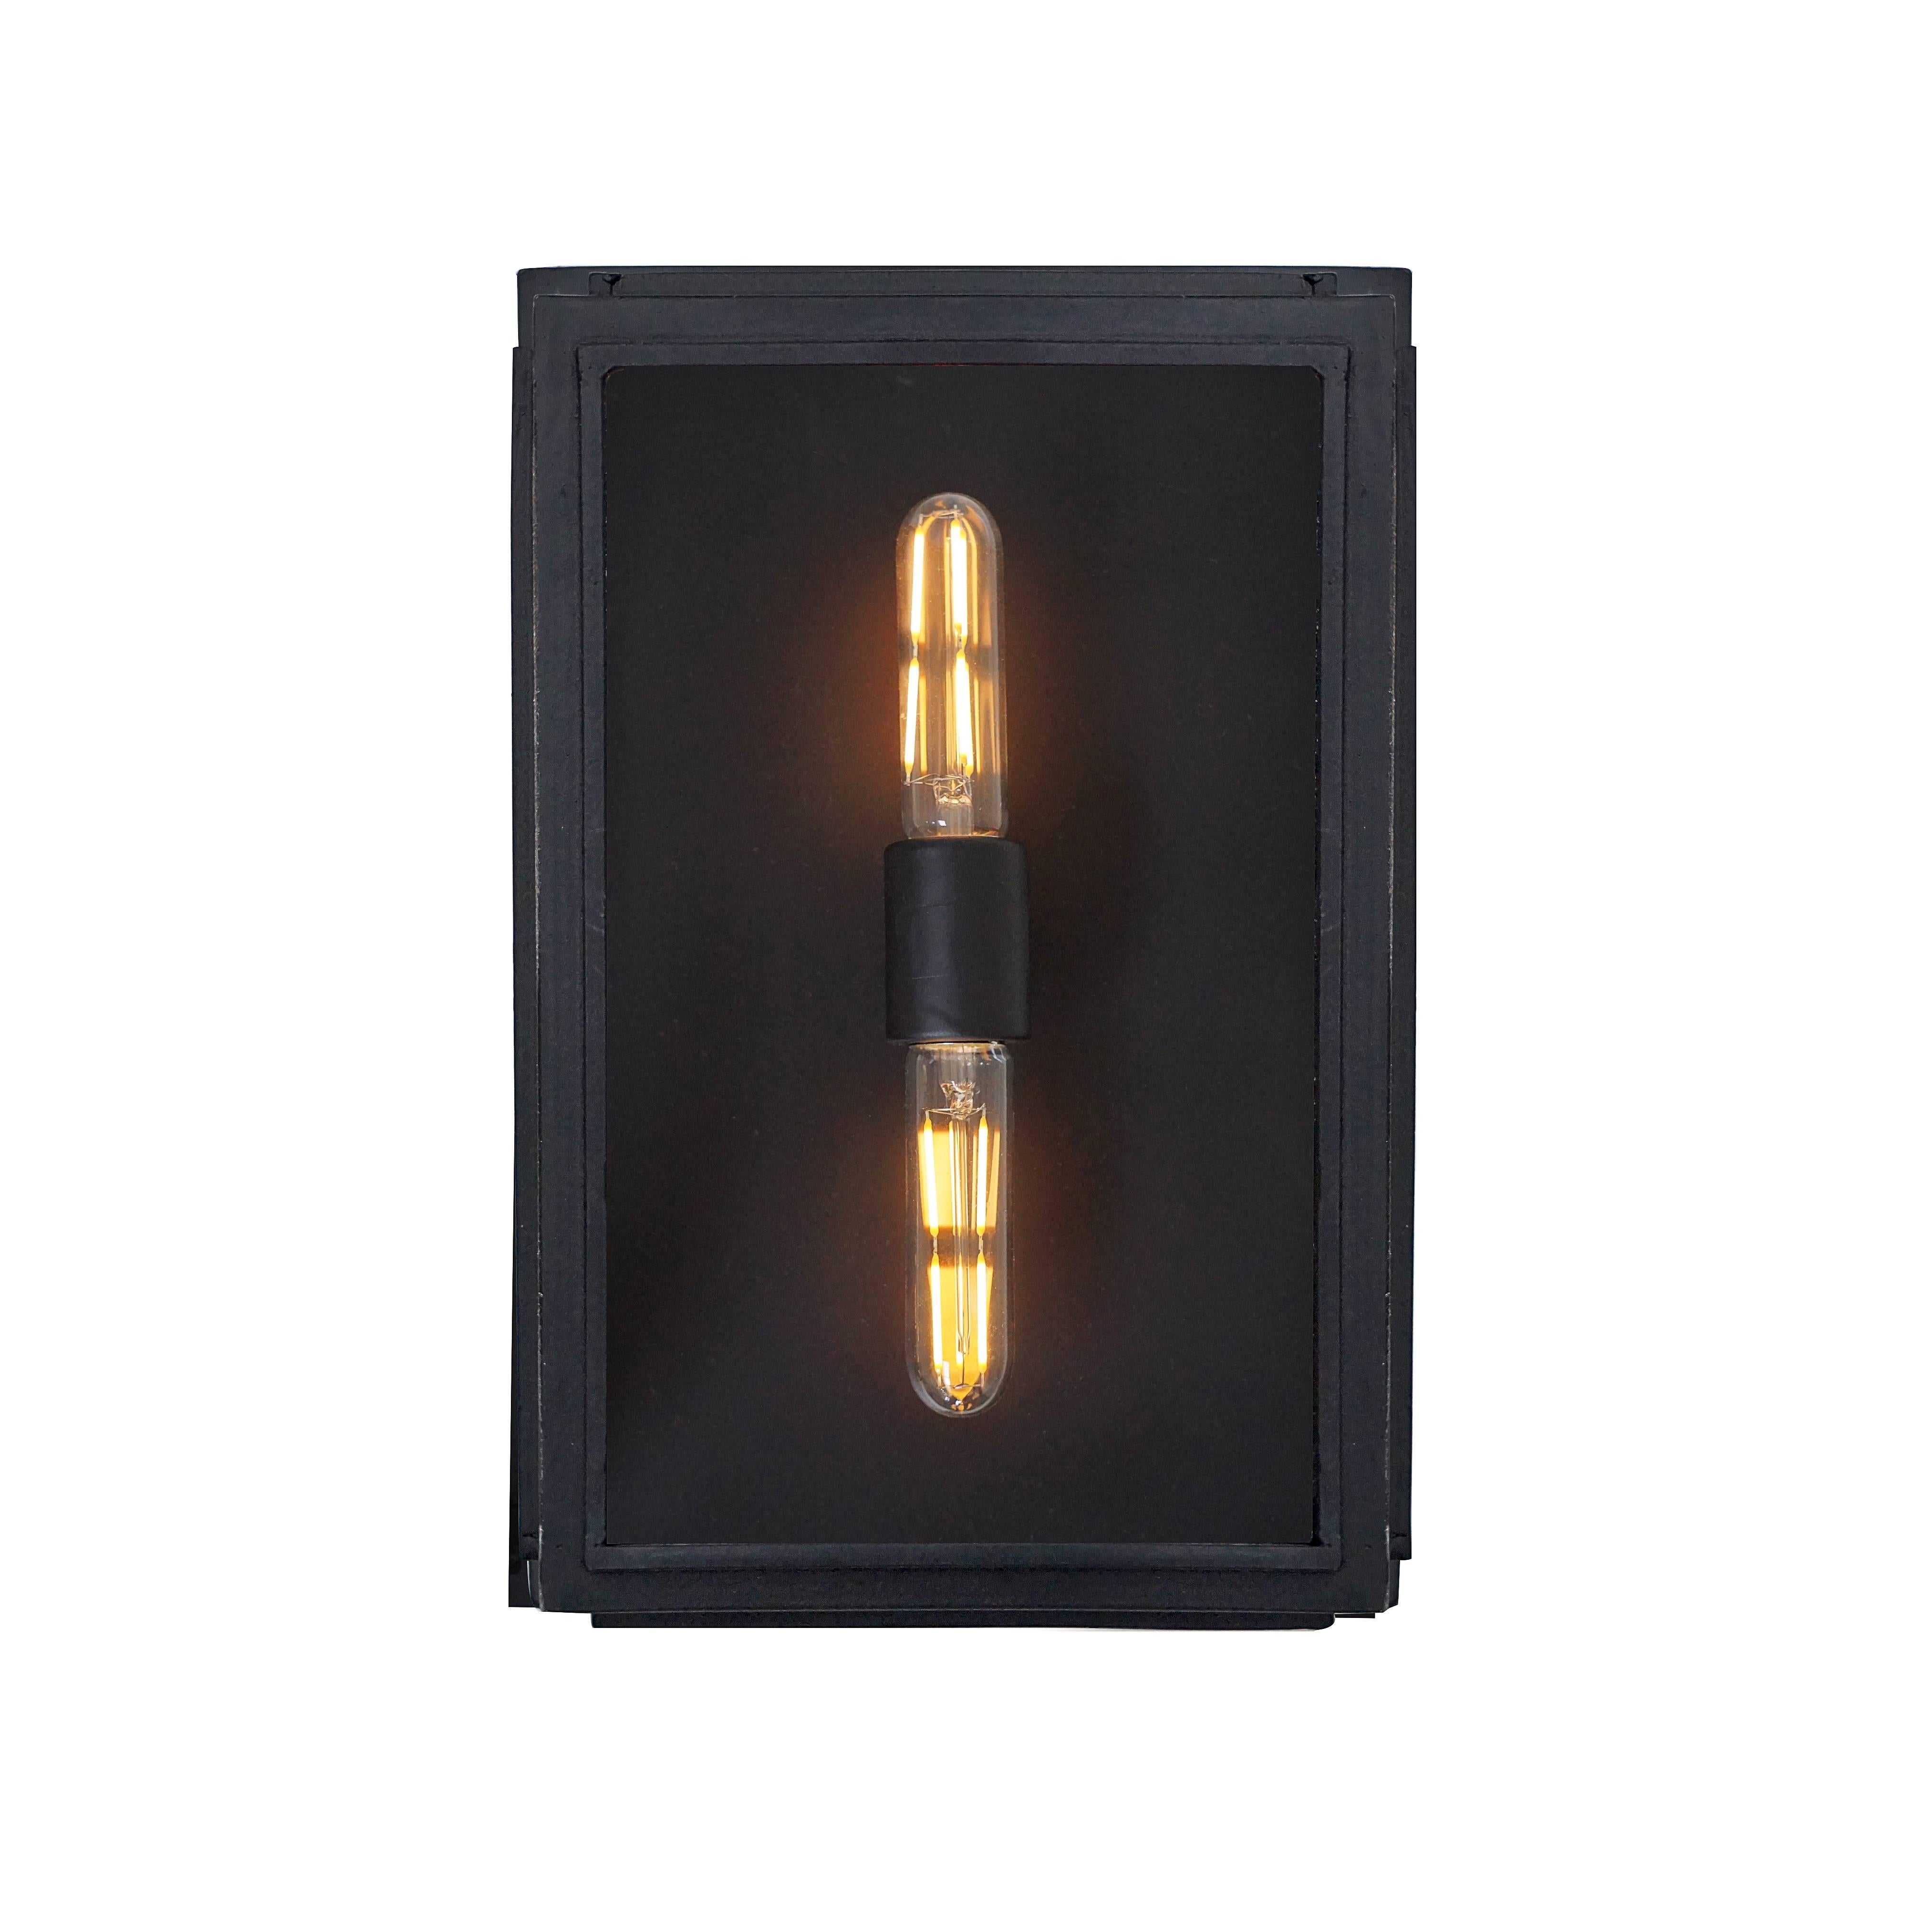 Offering a streamline contemporary design the Bel Air lantern was inspired by a modern estate in Bel Air. It incorporates a modern look with a modern day handmade quality. Made for a wall or ceiling when low profile lighting option is